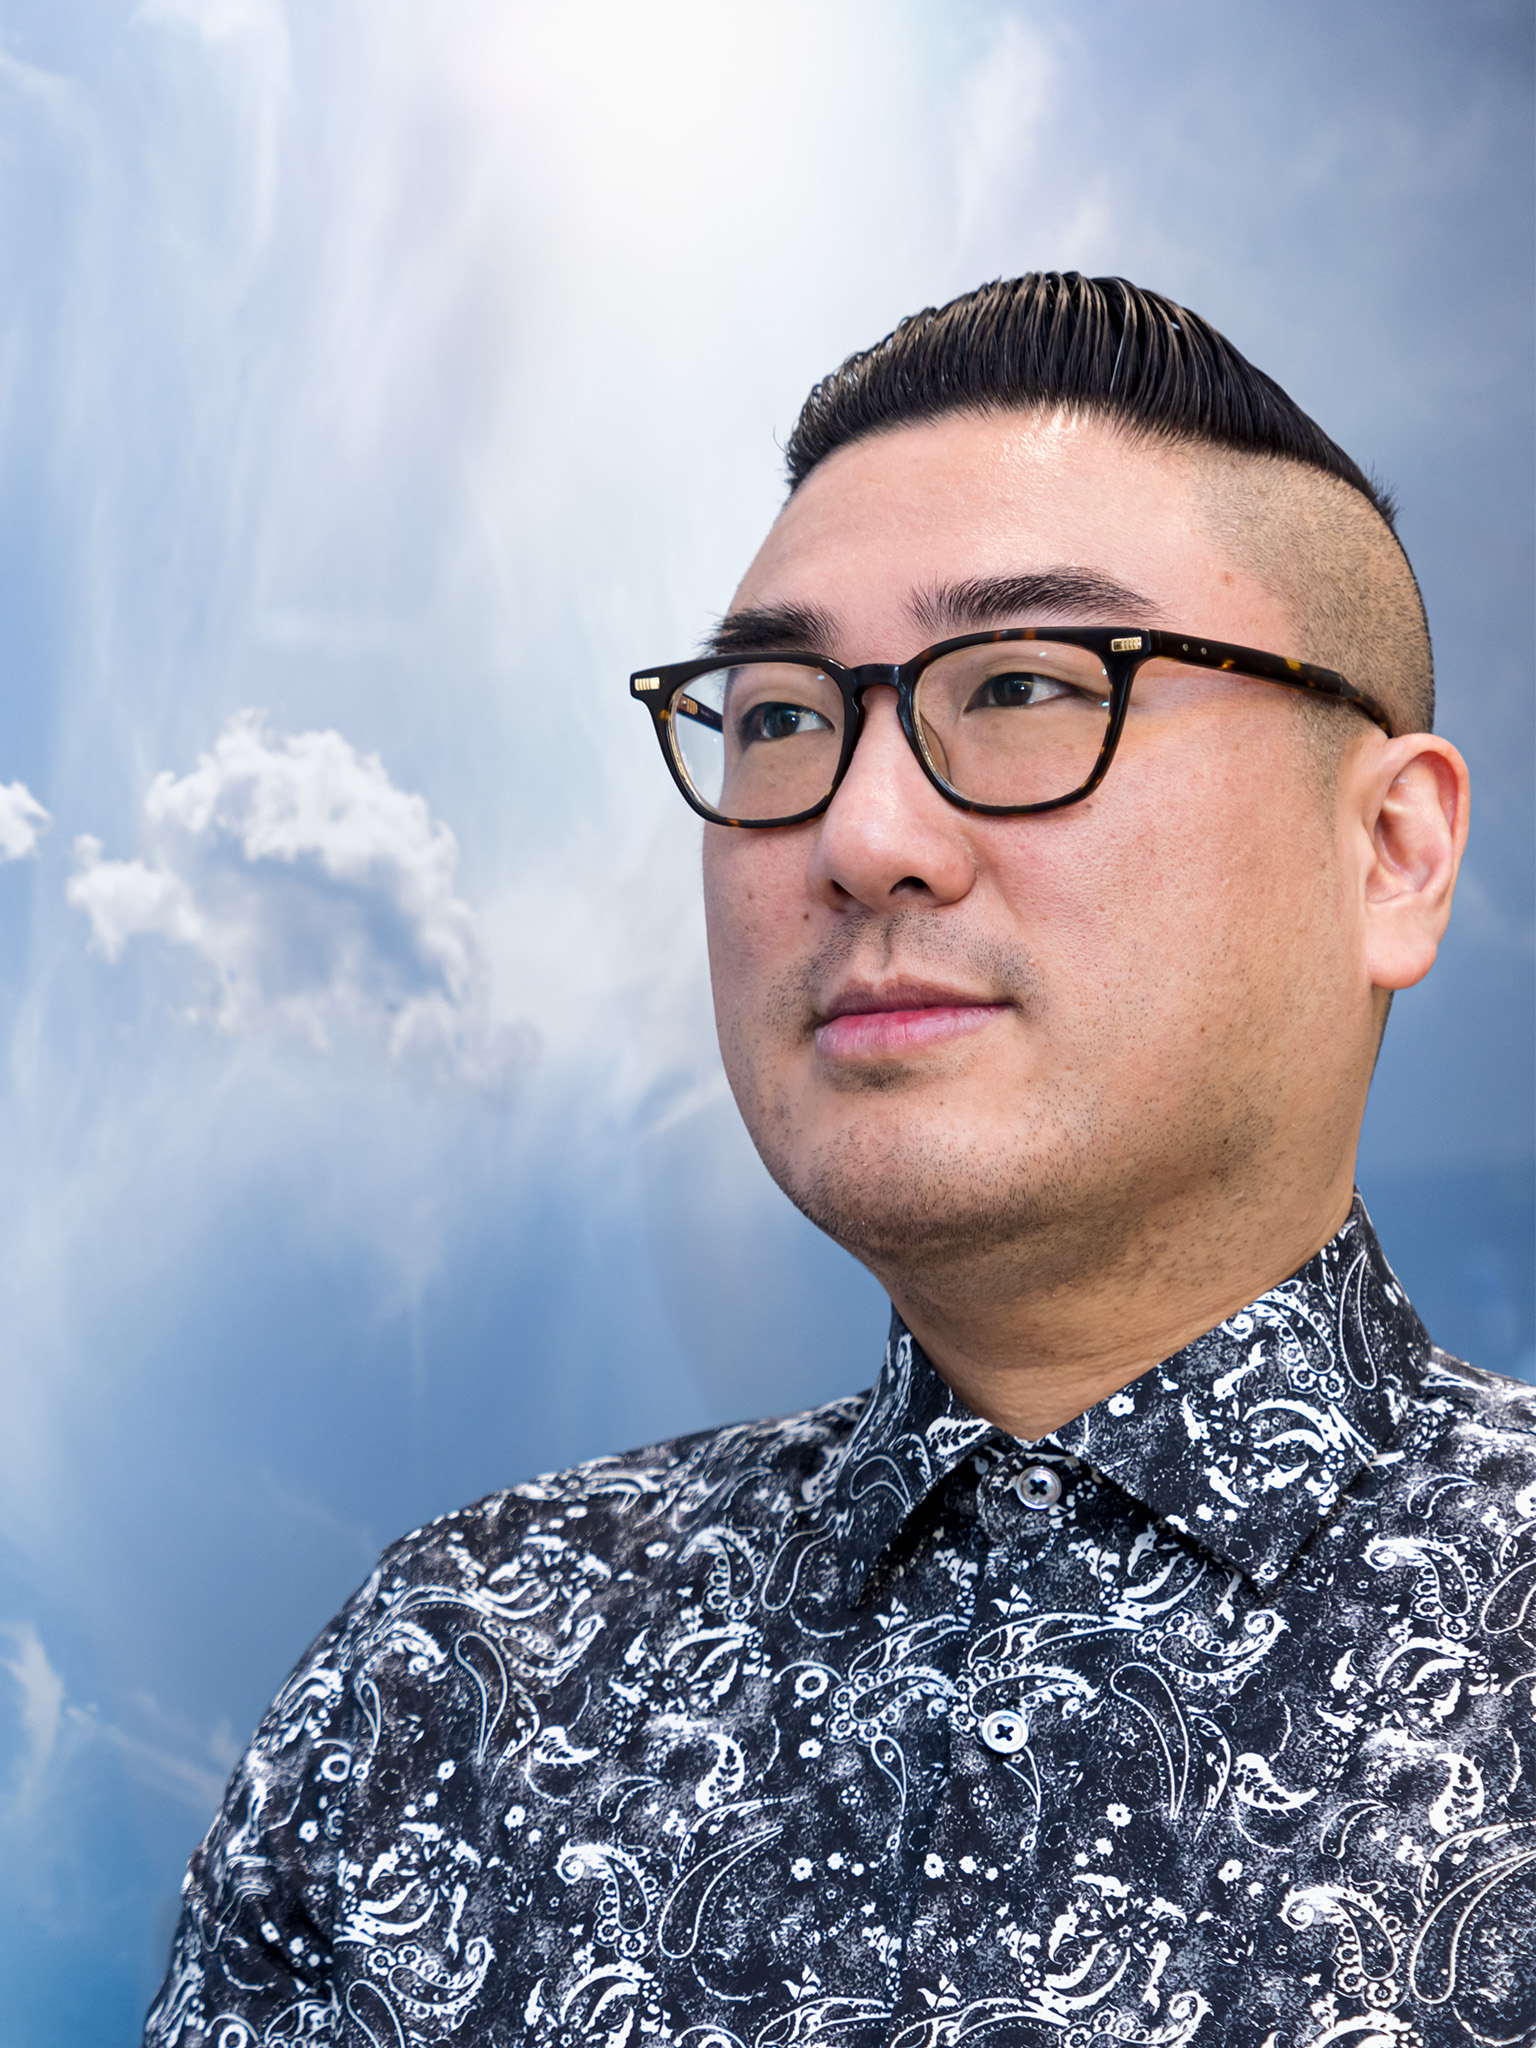 Michael Mak in paisley shirt, looking to the left, in front of blue sky with clouds background